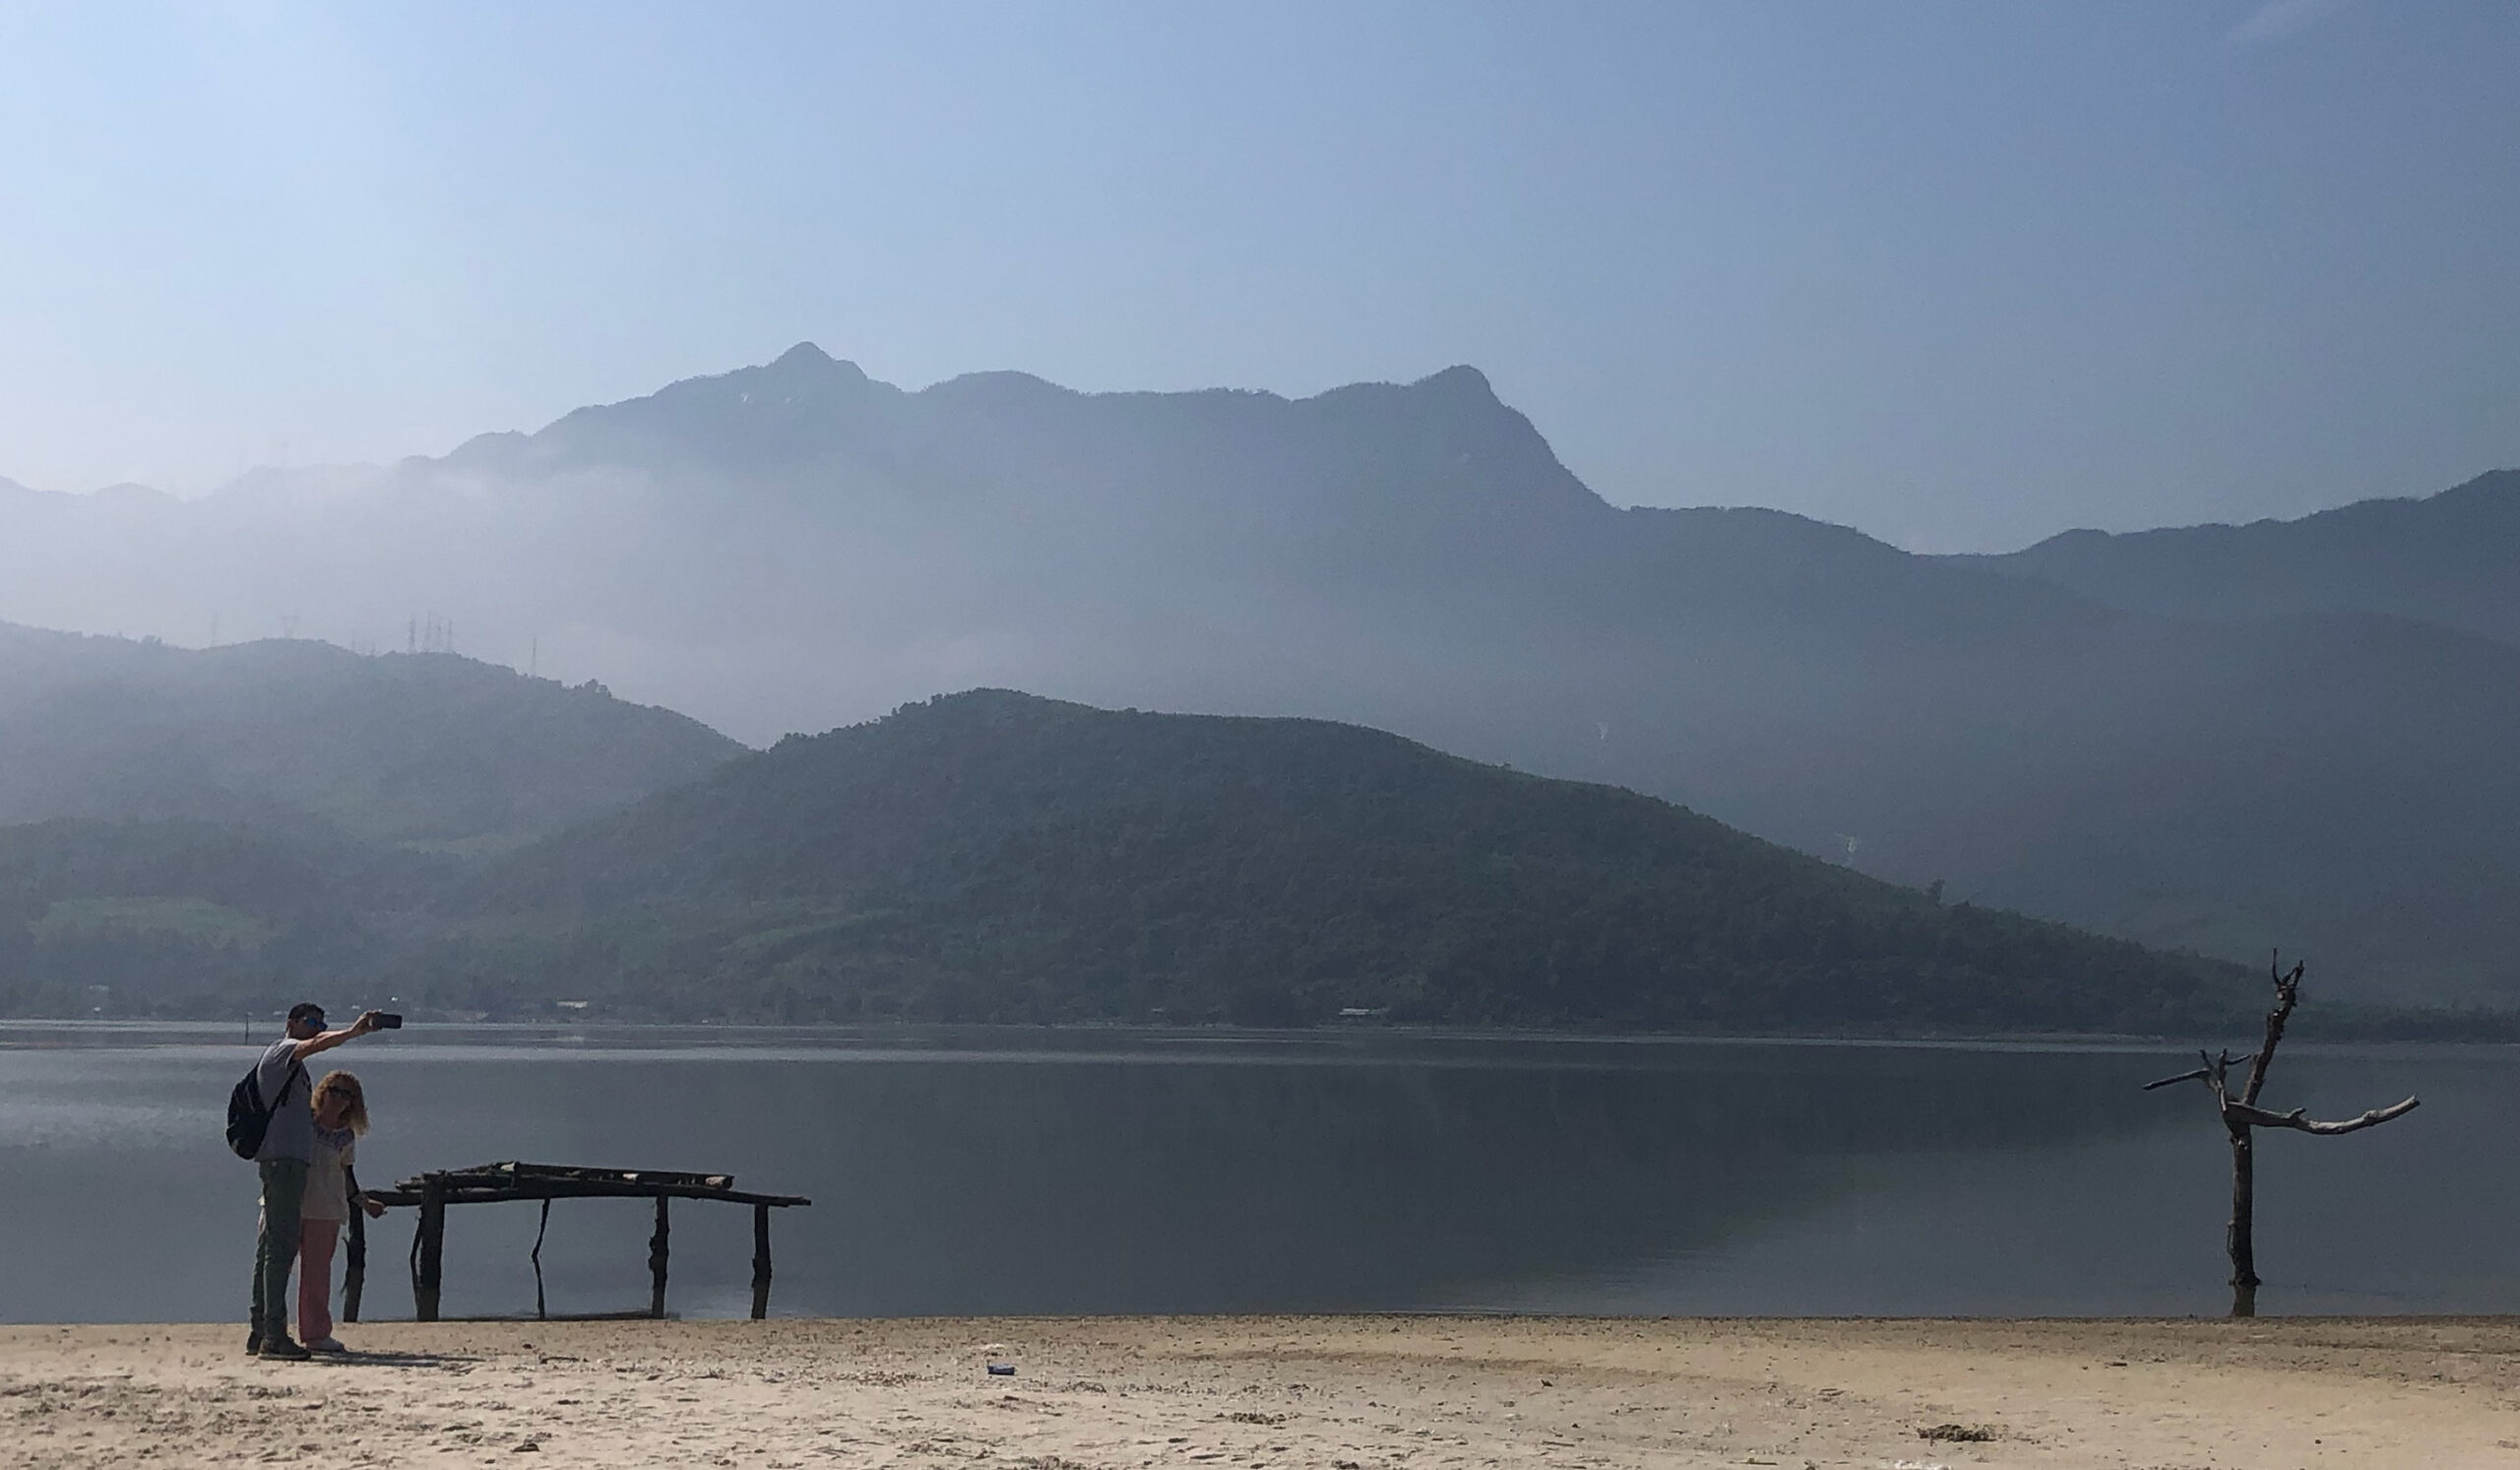 Foggy mountains in the distance with sand in the foreground and water in between. Two people stand on the sand taking a photo.